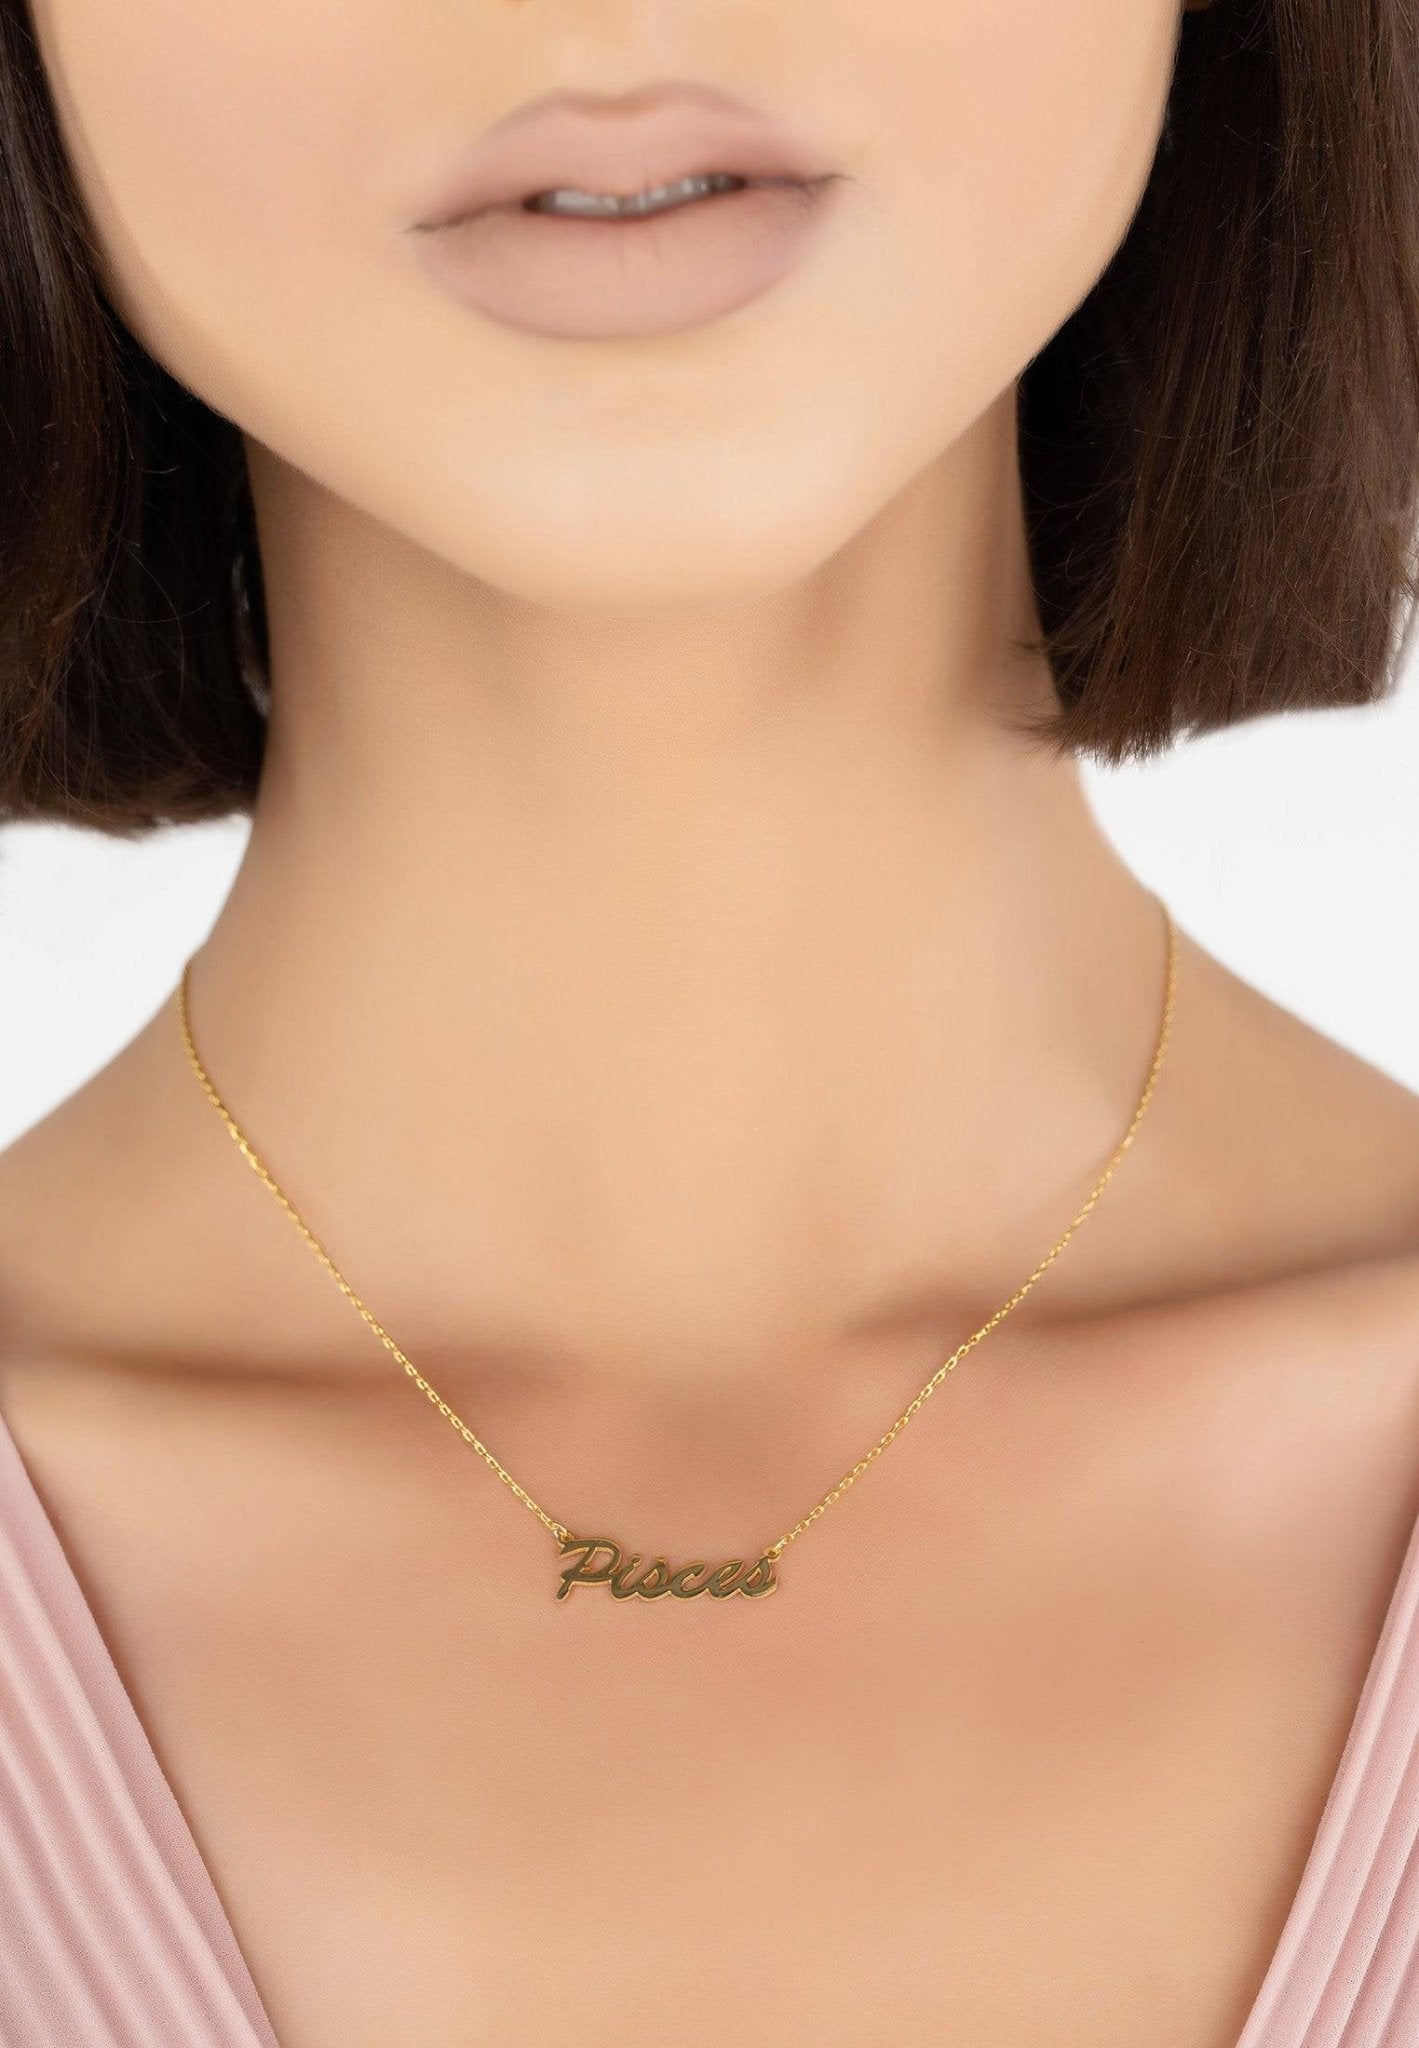 Personalized Necklaces - Zodiac Star Sign Name Necklace Gold Pisces 